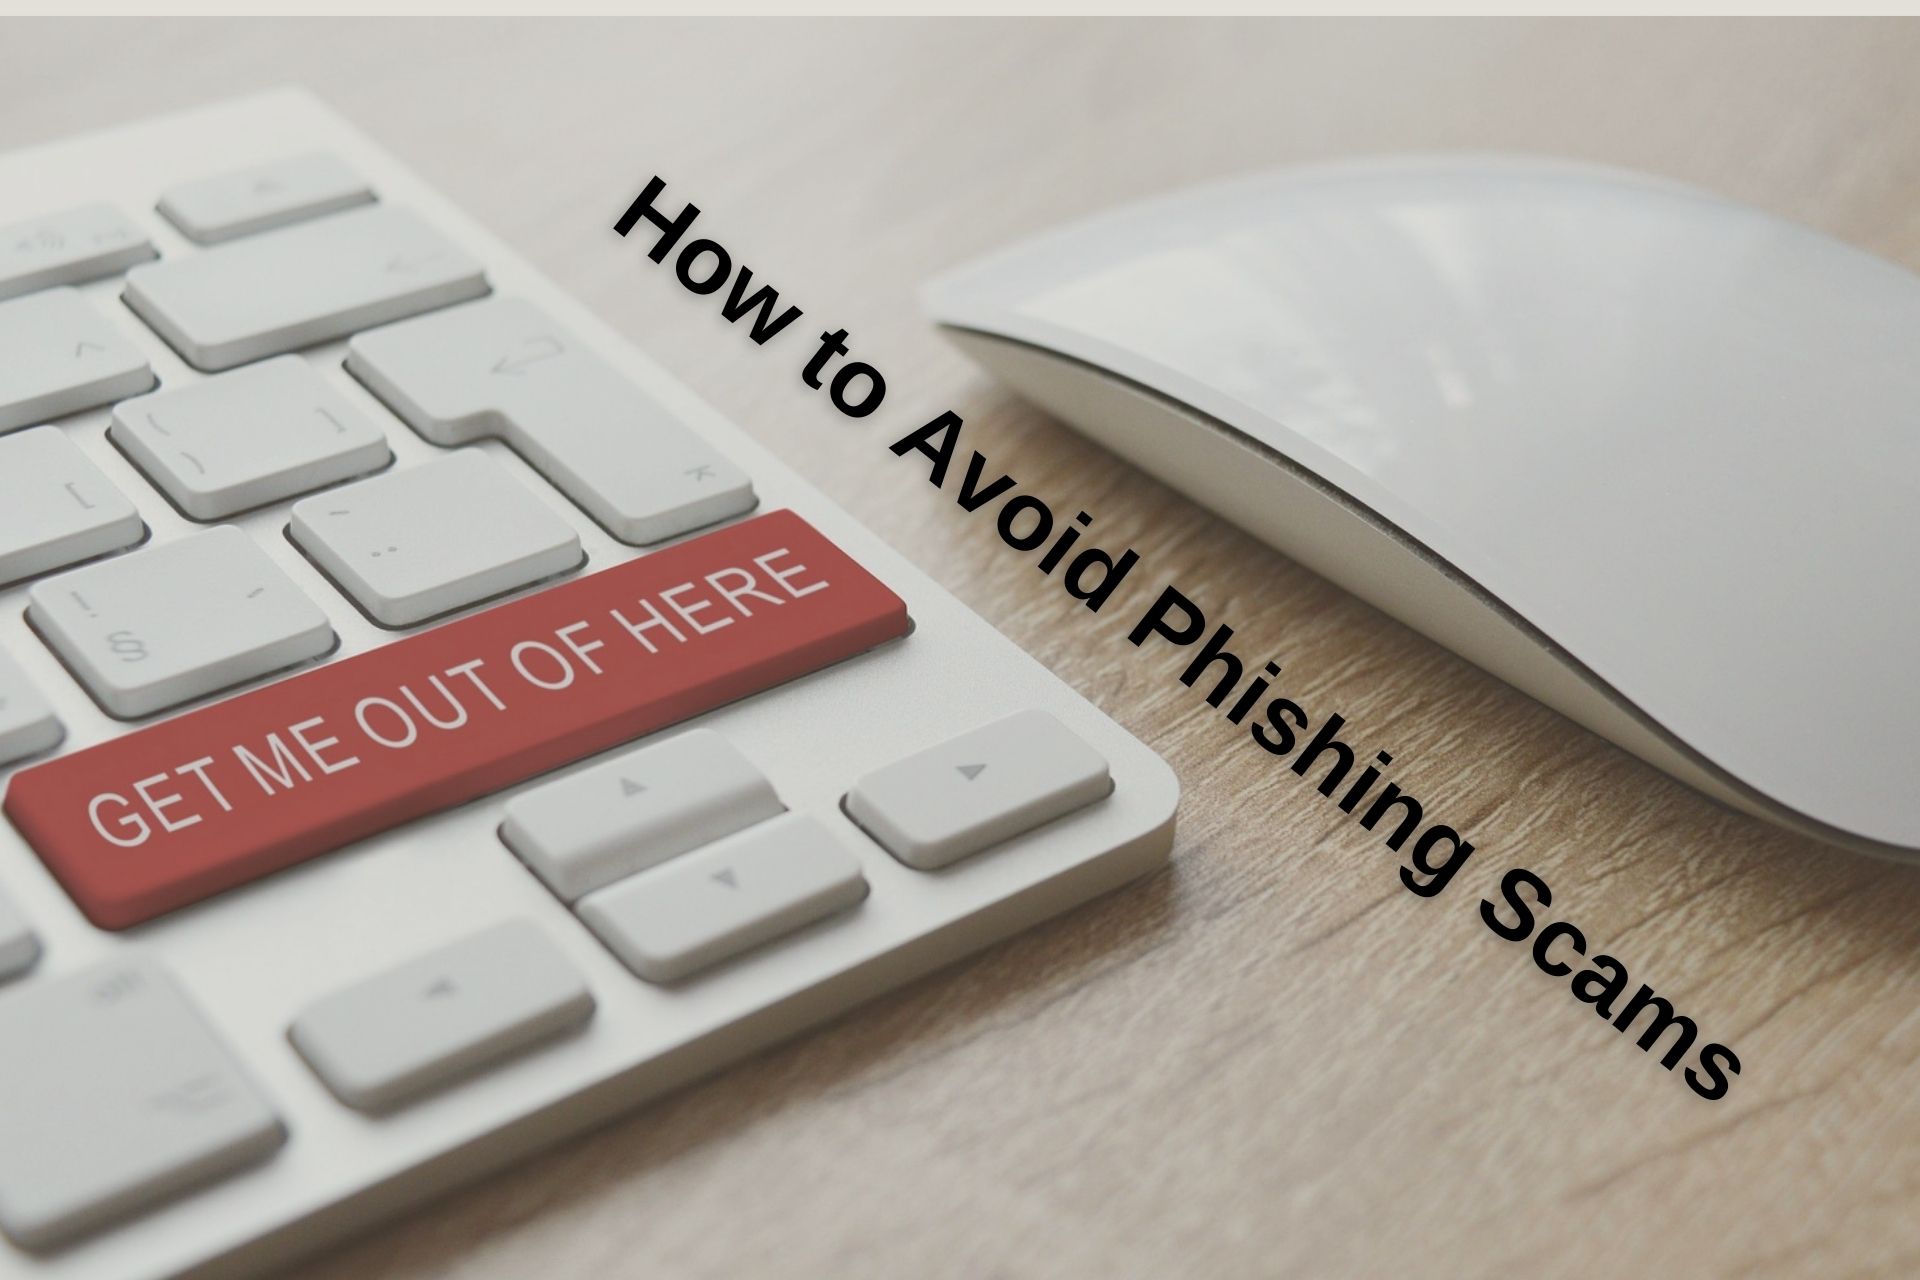 How to Avoid Phishing Scams